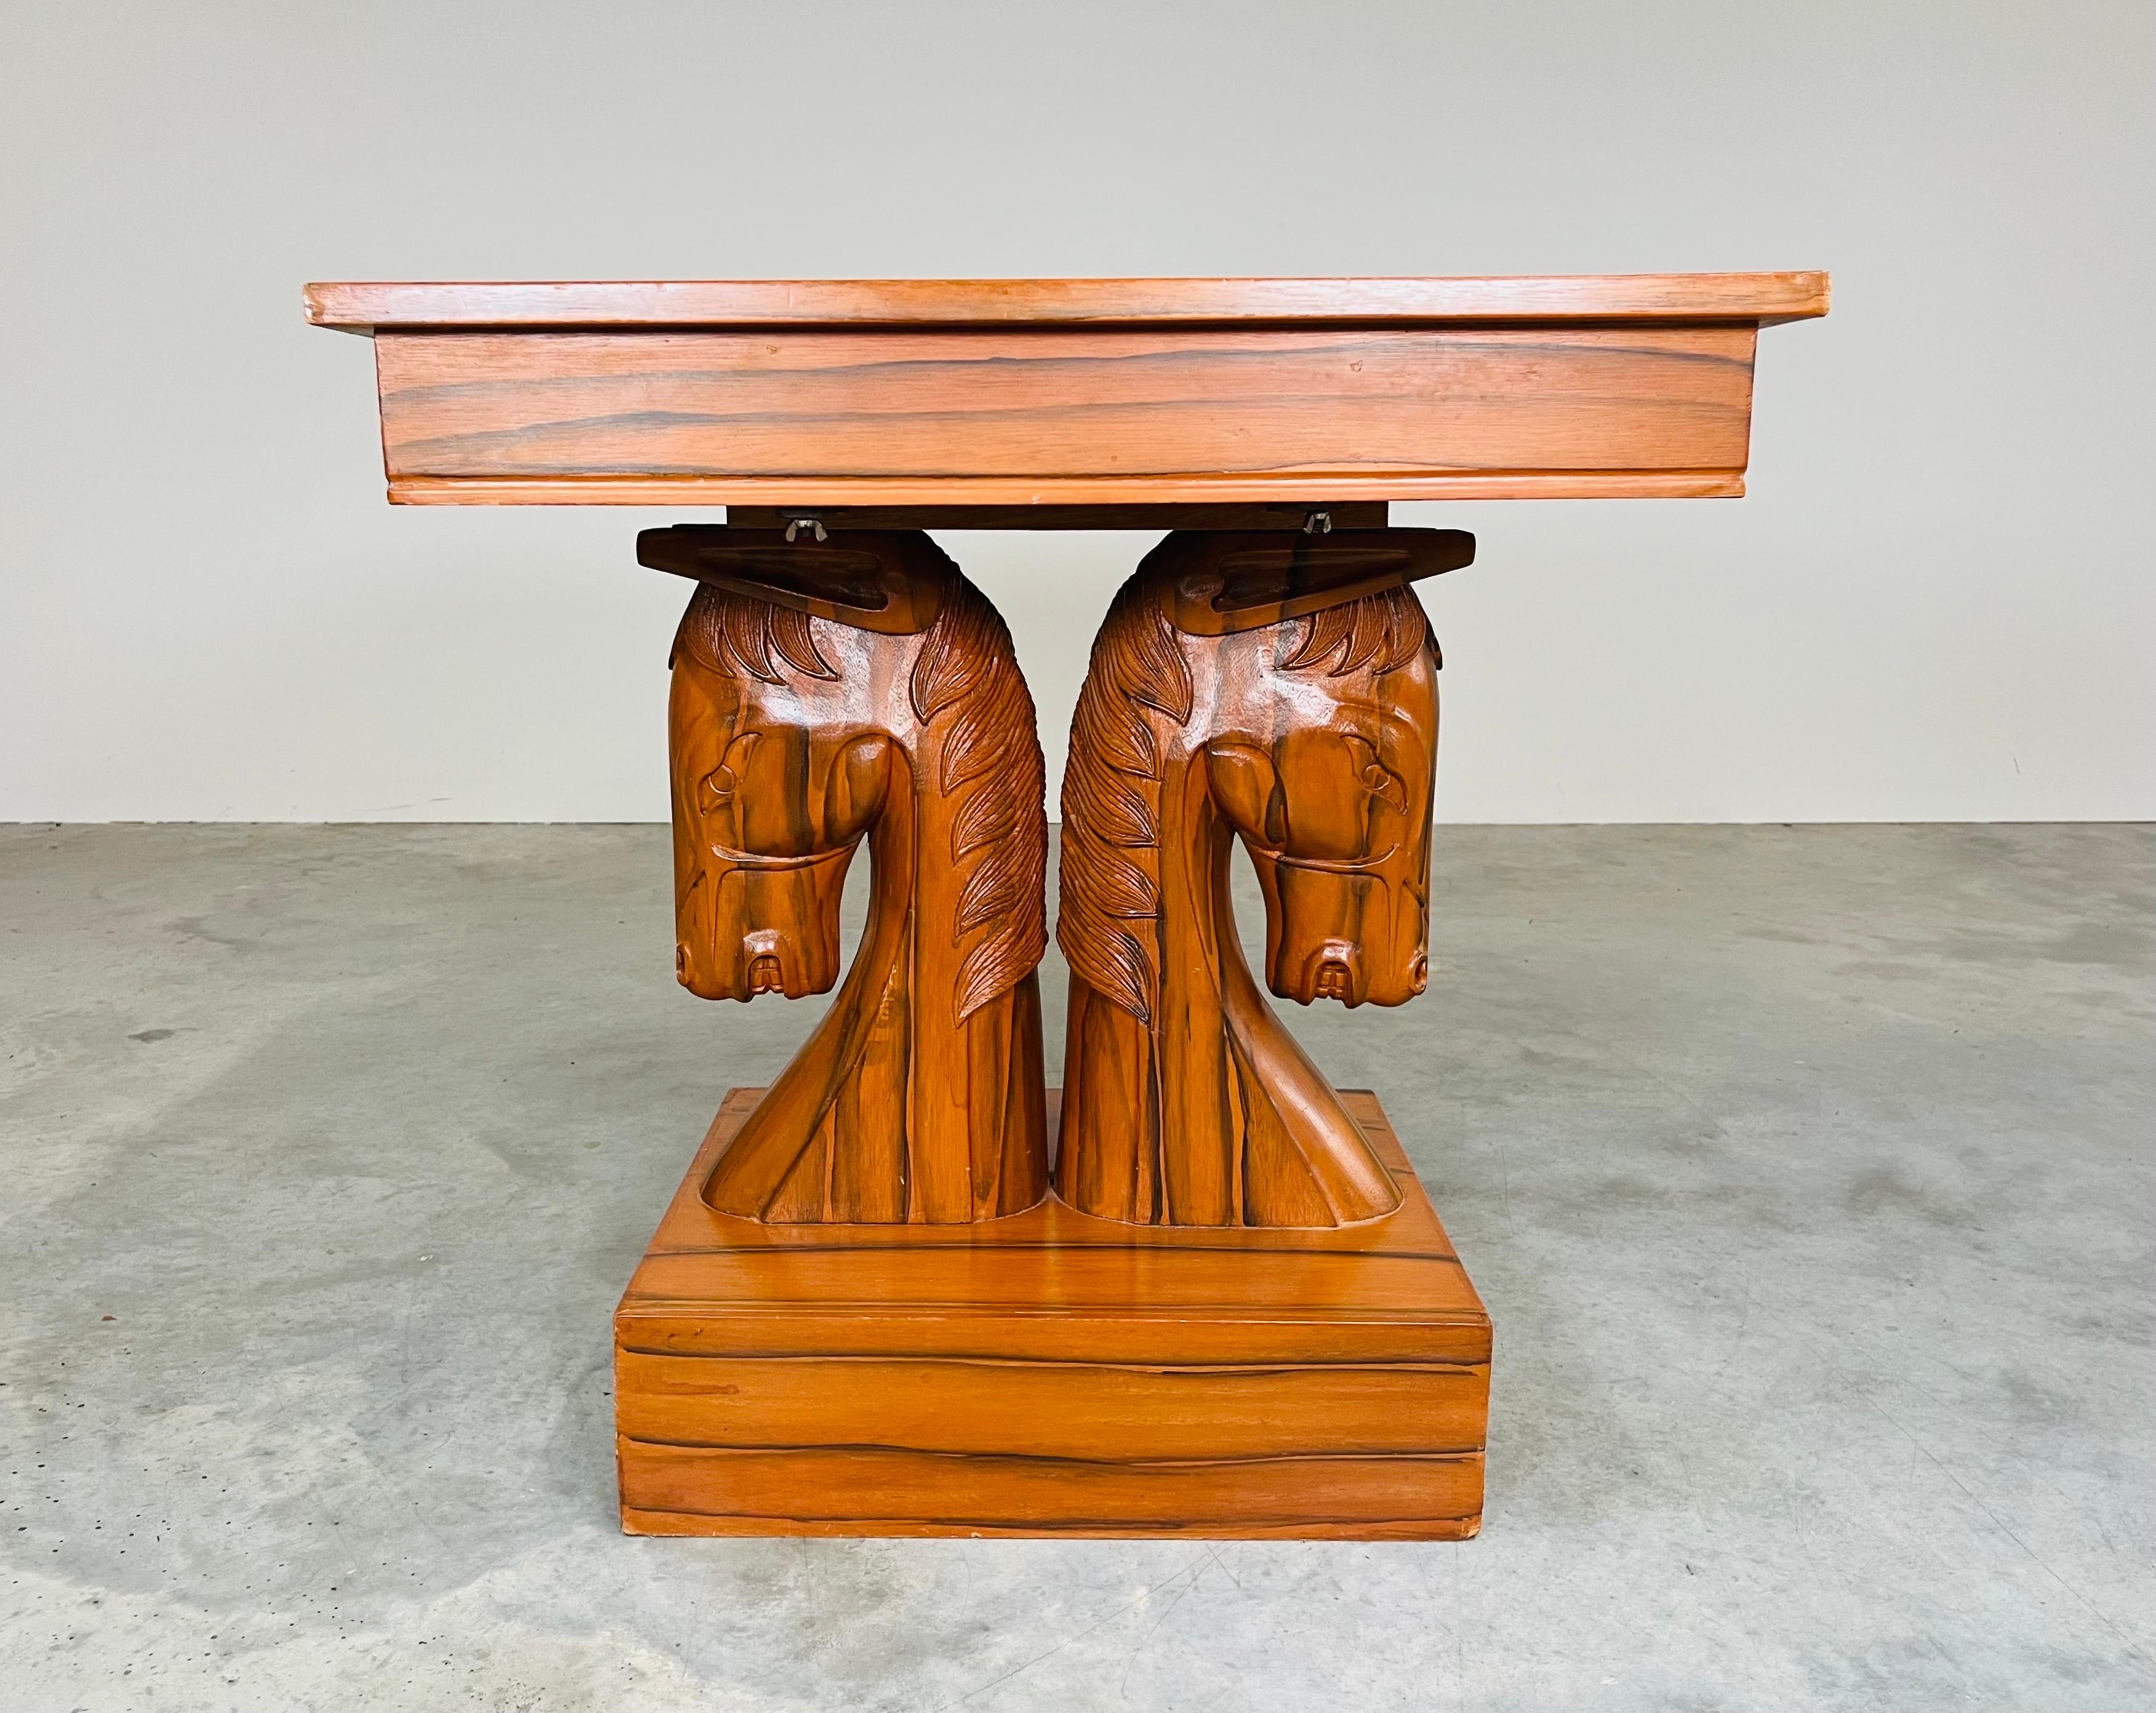 A unique and fanciful knight chess table in blended woods, the top is supported by a mahogany pedestal carved in the form of a pair of opposing horse's heads that rests on a square base, after William (Billy) Haines.
American, circa 1960
28x27x27”